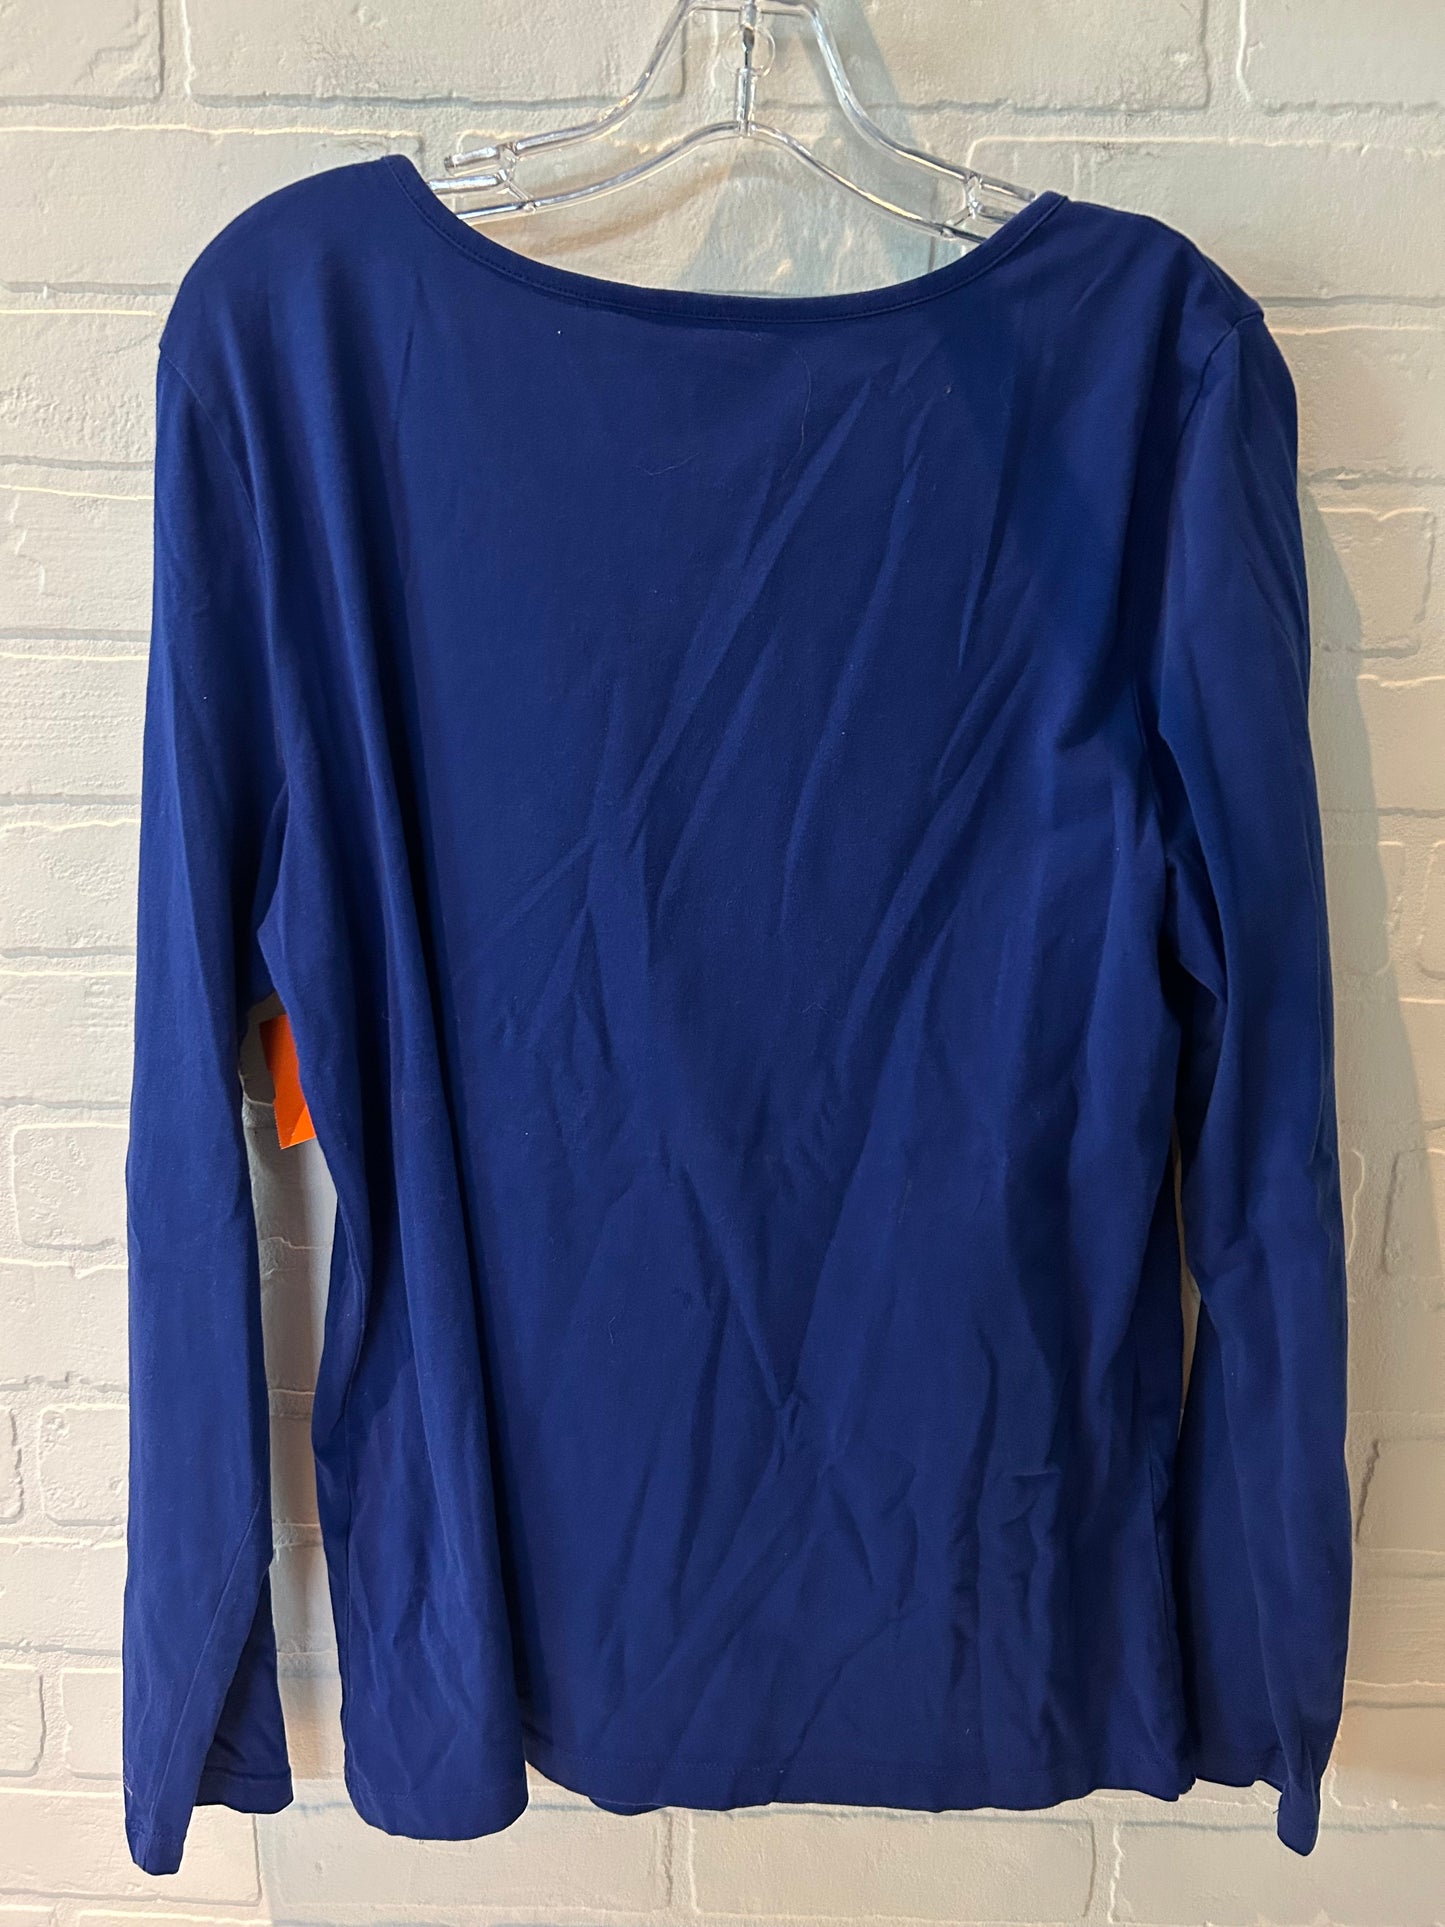 Blue Top Long Sleeve Christopher And Banks, Size L